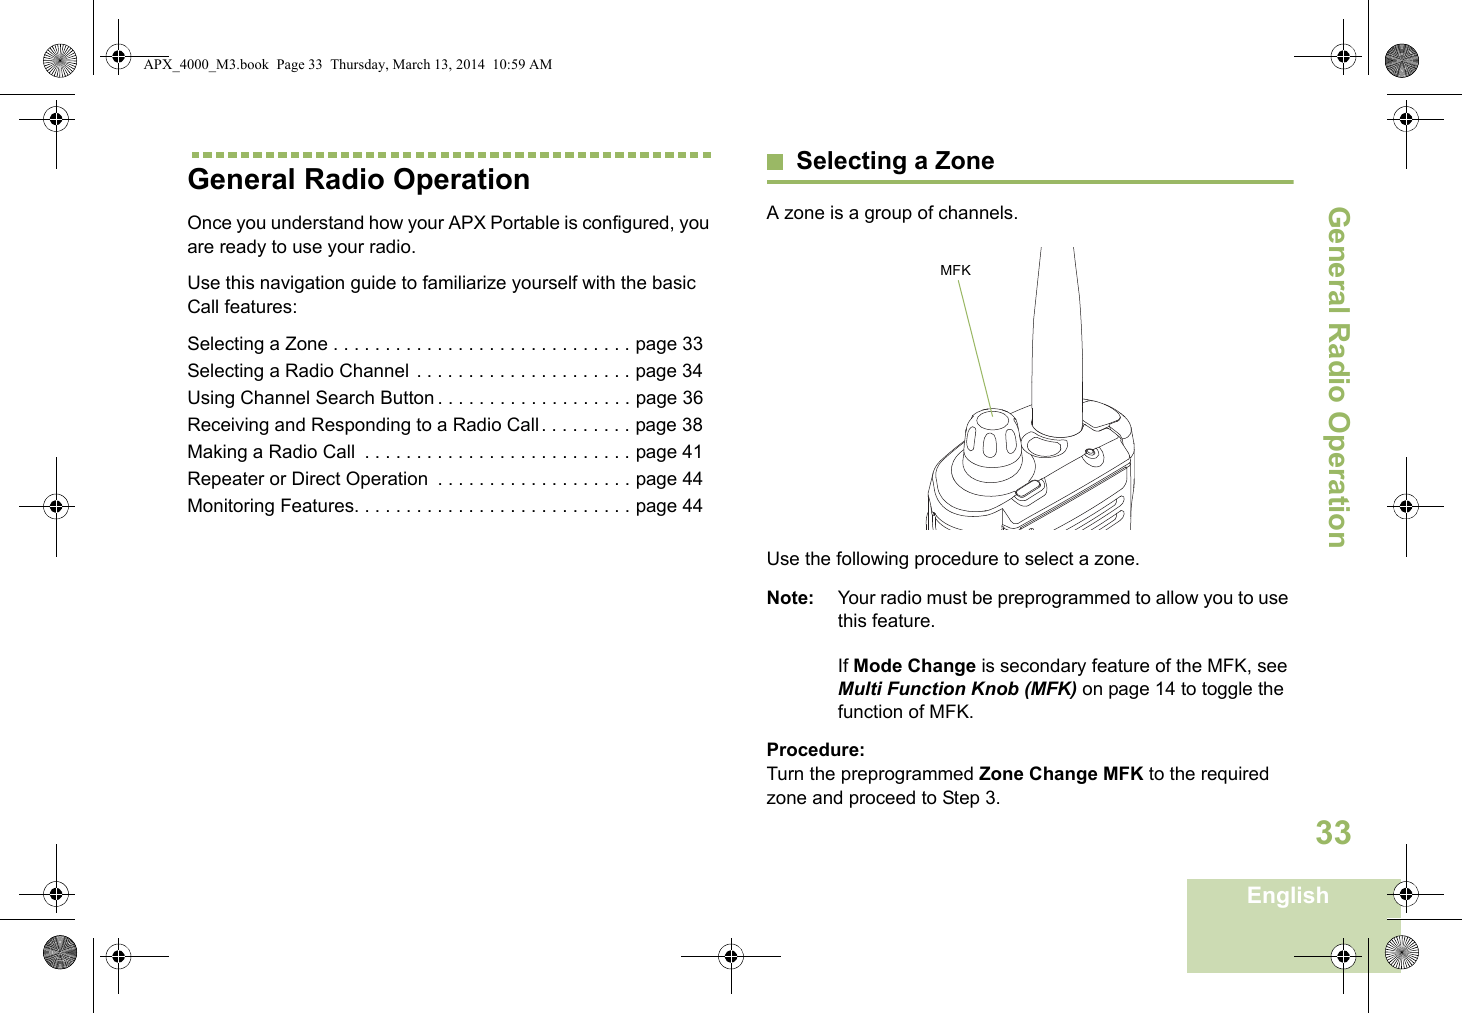 General Radio OperationEnglish33General Radio OperationOnce you understand how your APX Portable is configured, you are ready to use your radio.Use this navigation guide to familiarize yourself with the basic Call features:Selecting a Zone . . . . . . . . . . . . . . . . . . . . . . . . . . . . . page 33Selecting a Radio Channel  . . . . . . . . . . . . . . . . . . . . . page 34Using Channel Search Button . . . . . . . . . . . . . . . . . . . page 36Receiving and Responding to a Radio Call . . . . . . . . . page 38Making a Radio Call  . . . . . . . . . . . . . . . . . . . . . . . . . . page 41Repeater or Direct Operation  . . . . . . . . . . . . . . . . . . . page 44Monitoring Features. . . . . . . . . . . . . . . . . . . . . . . . . . . page 44Selecting a ZoneA zone is a group of channels. Use the following procedure to select a zone.Note: Your radio must be preprogrammed to allow you to use this feature.If Mode Change is secondary feature of the MFK, see Multi Function Knob (MFK) on page 14 to toggle the function of MFK.Procedure:Turn the preprogrammed Zone Change MFK to the required zone and proceed to Step 3.MFKAPX_4000_M3.book  Page 33  Thursday, March 13, 2014  10:59 AM